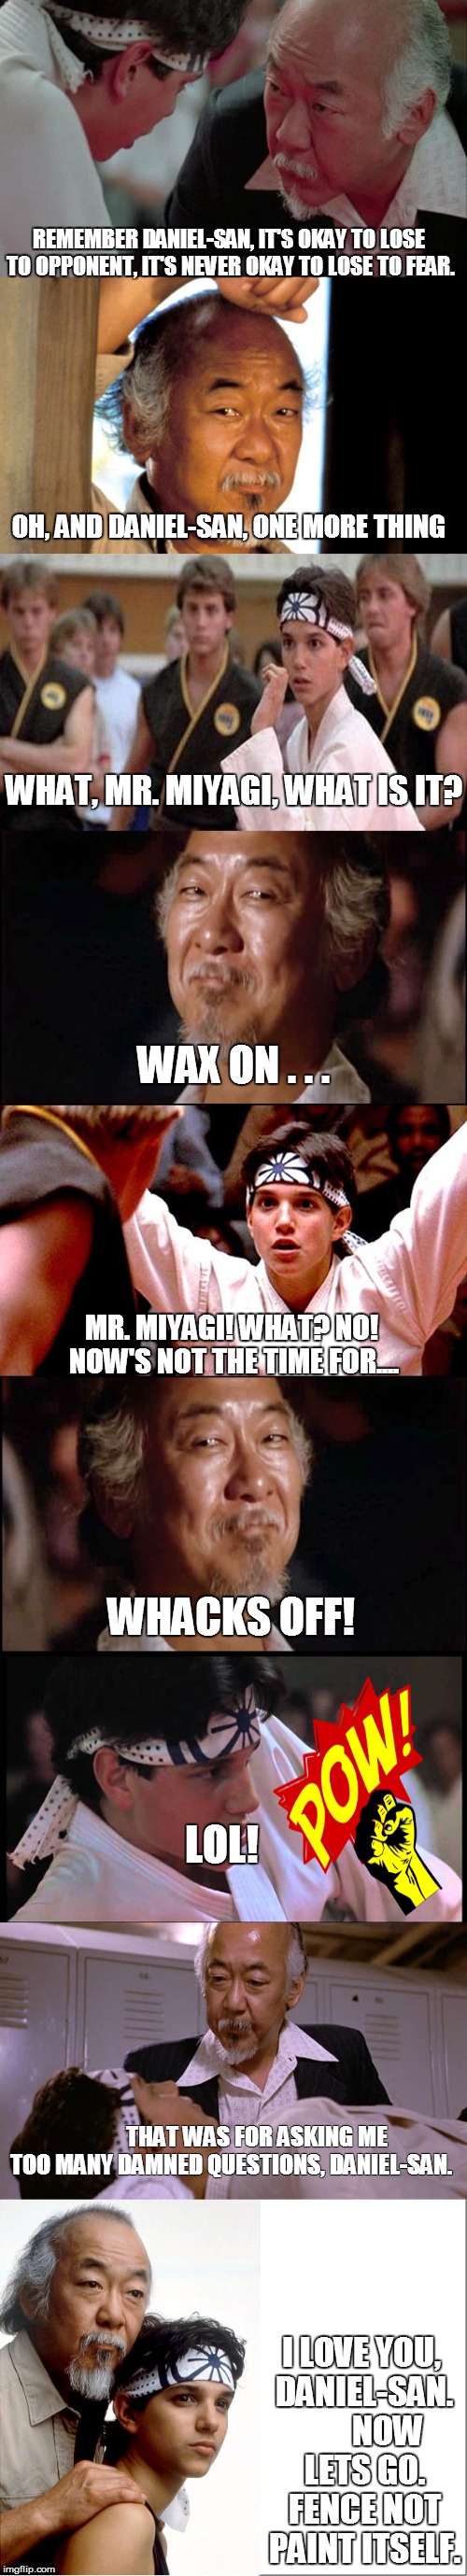 Wax on...... | REMEMBER DANIEL-SAN, IT'S OKAY TO LOSE TO OPPONENT, IT'S NEVER OKAY TO LOSE TO FEAR. I LOVE YOU, DANIEL-SAN.      NOW LETS GO. FENCE NOT P | image tagged in karate kid,mr miyagi,daniel-san,memes | made w/ Imgflip meme maker